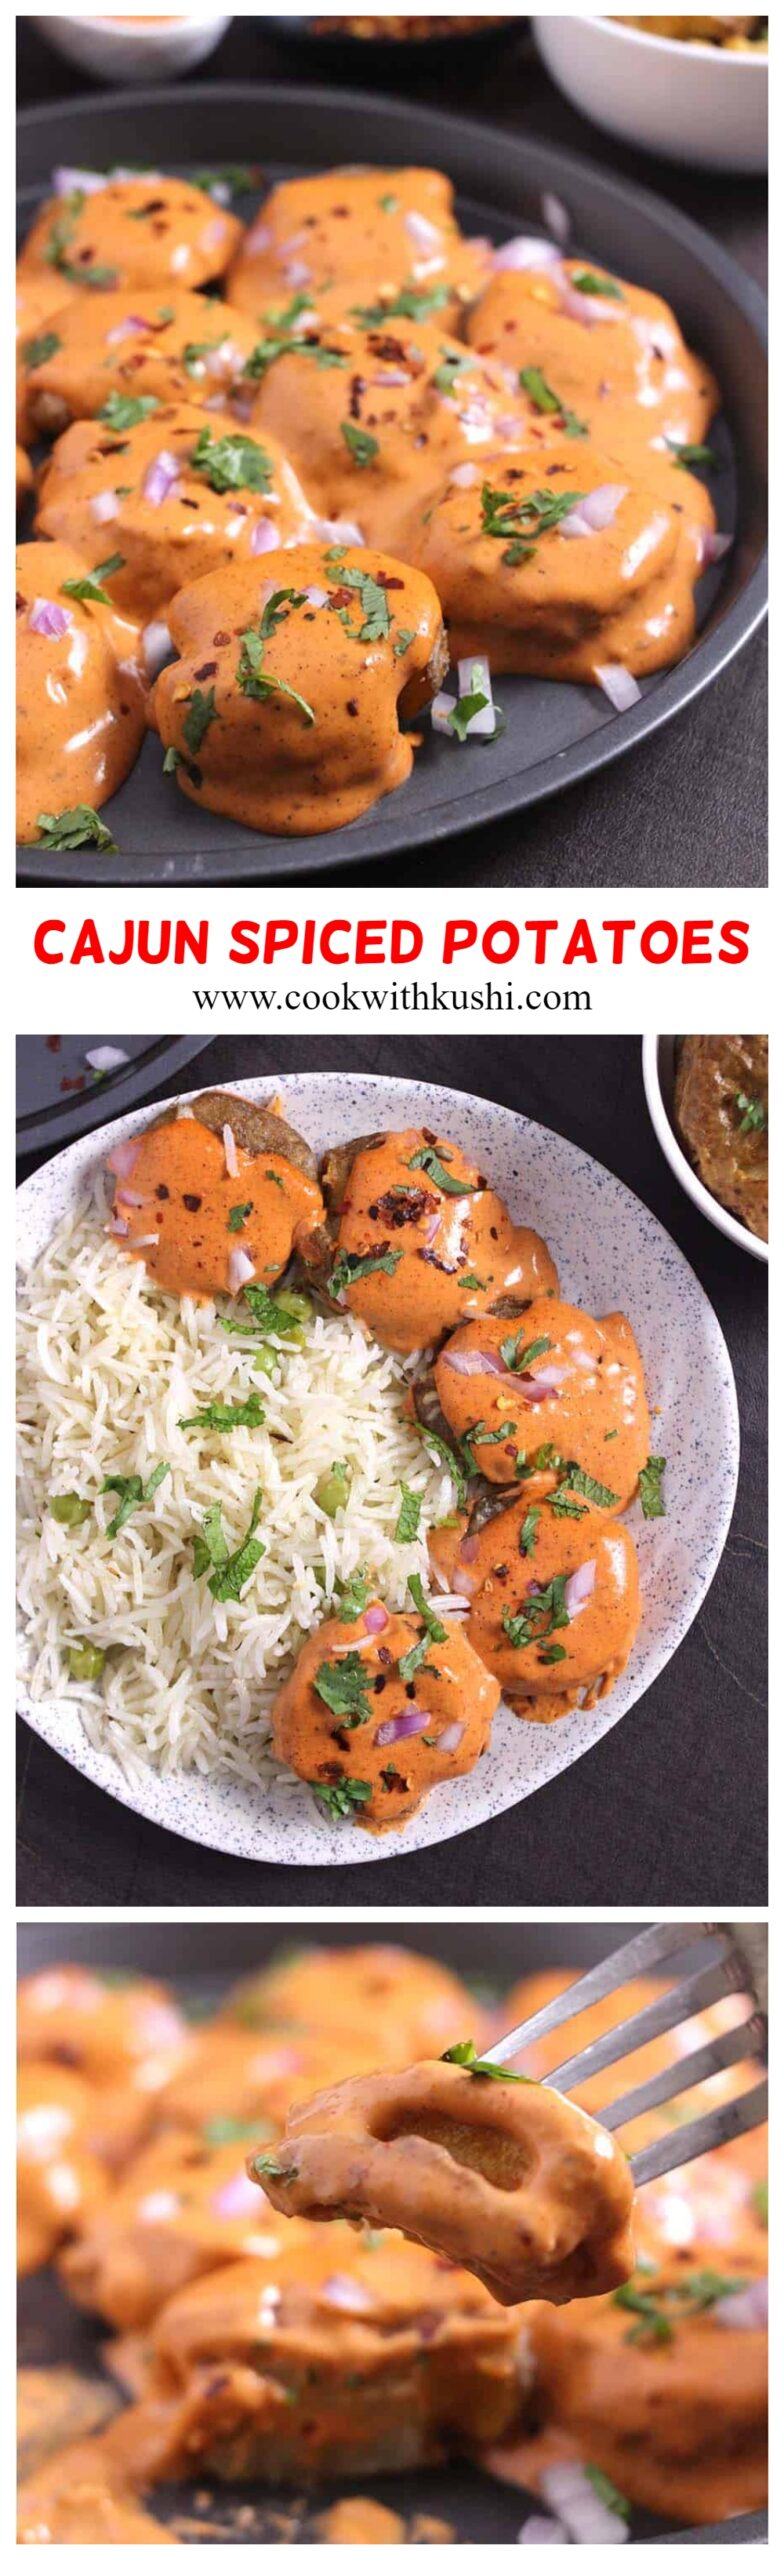 Cajun Potatoes are crispy on the outside, creamy, and melt in the mouth on the inside. These are finger licking and lip smacking good, and I bet you can't stop by just eating one. #cajun #cajunspiced cajunseasoning #bbq #barbecue